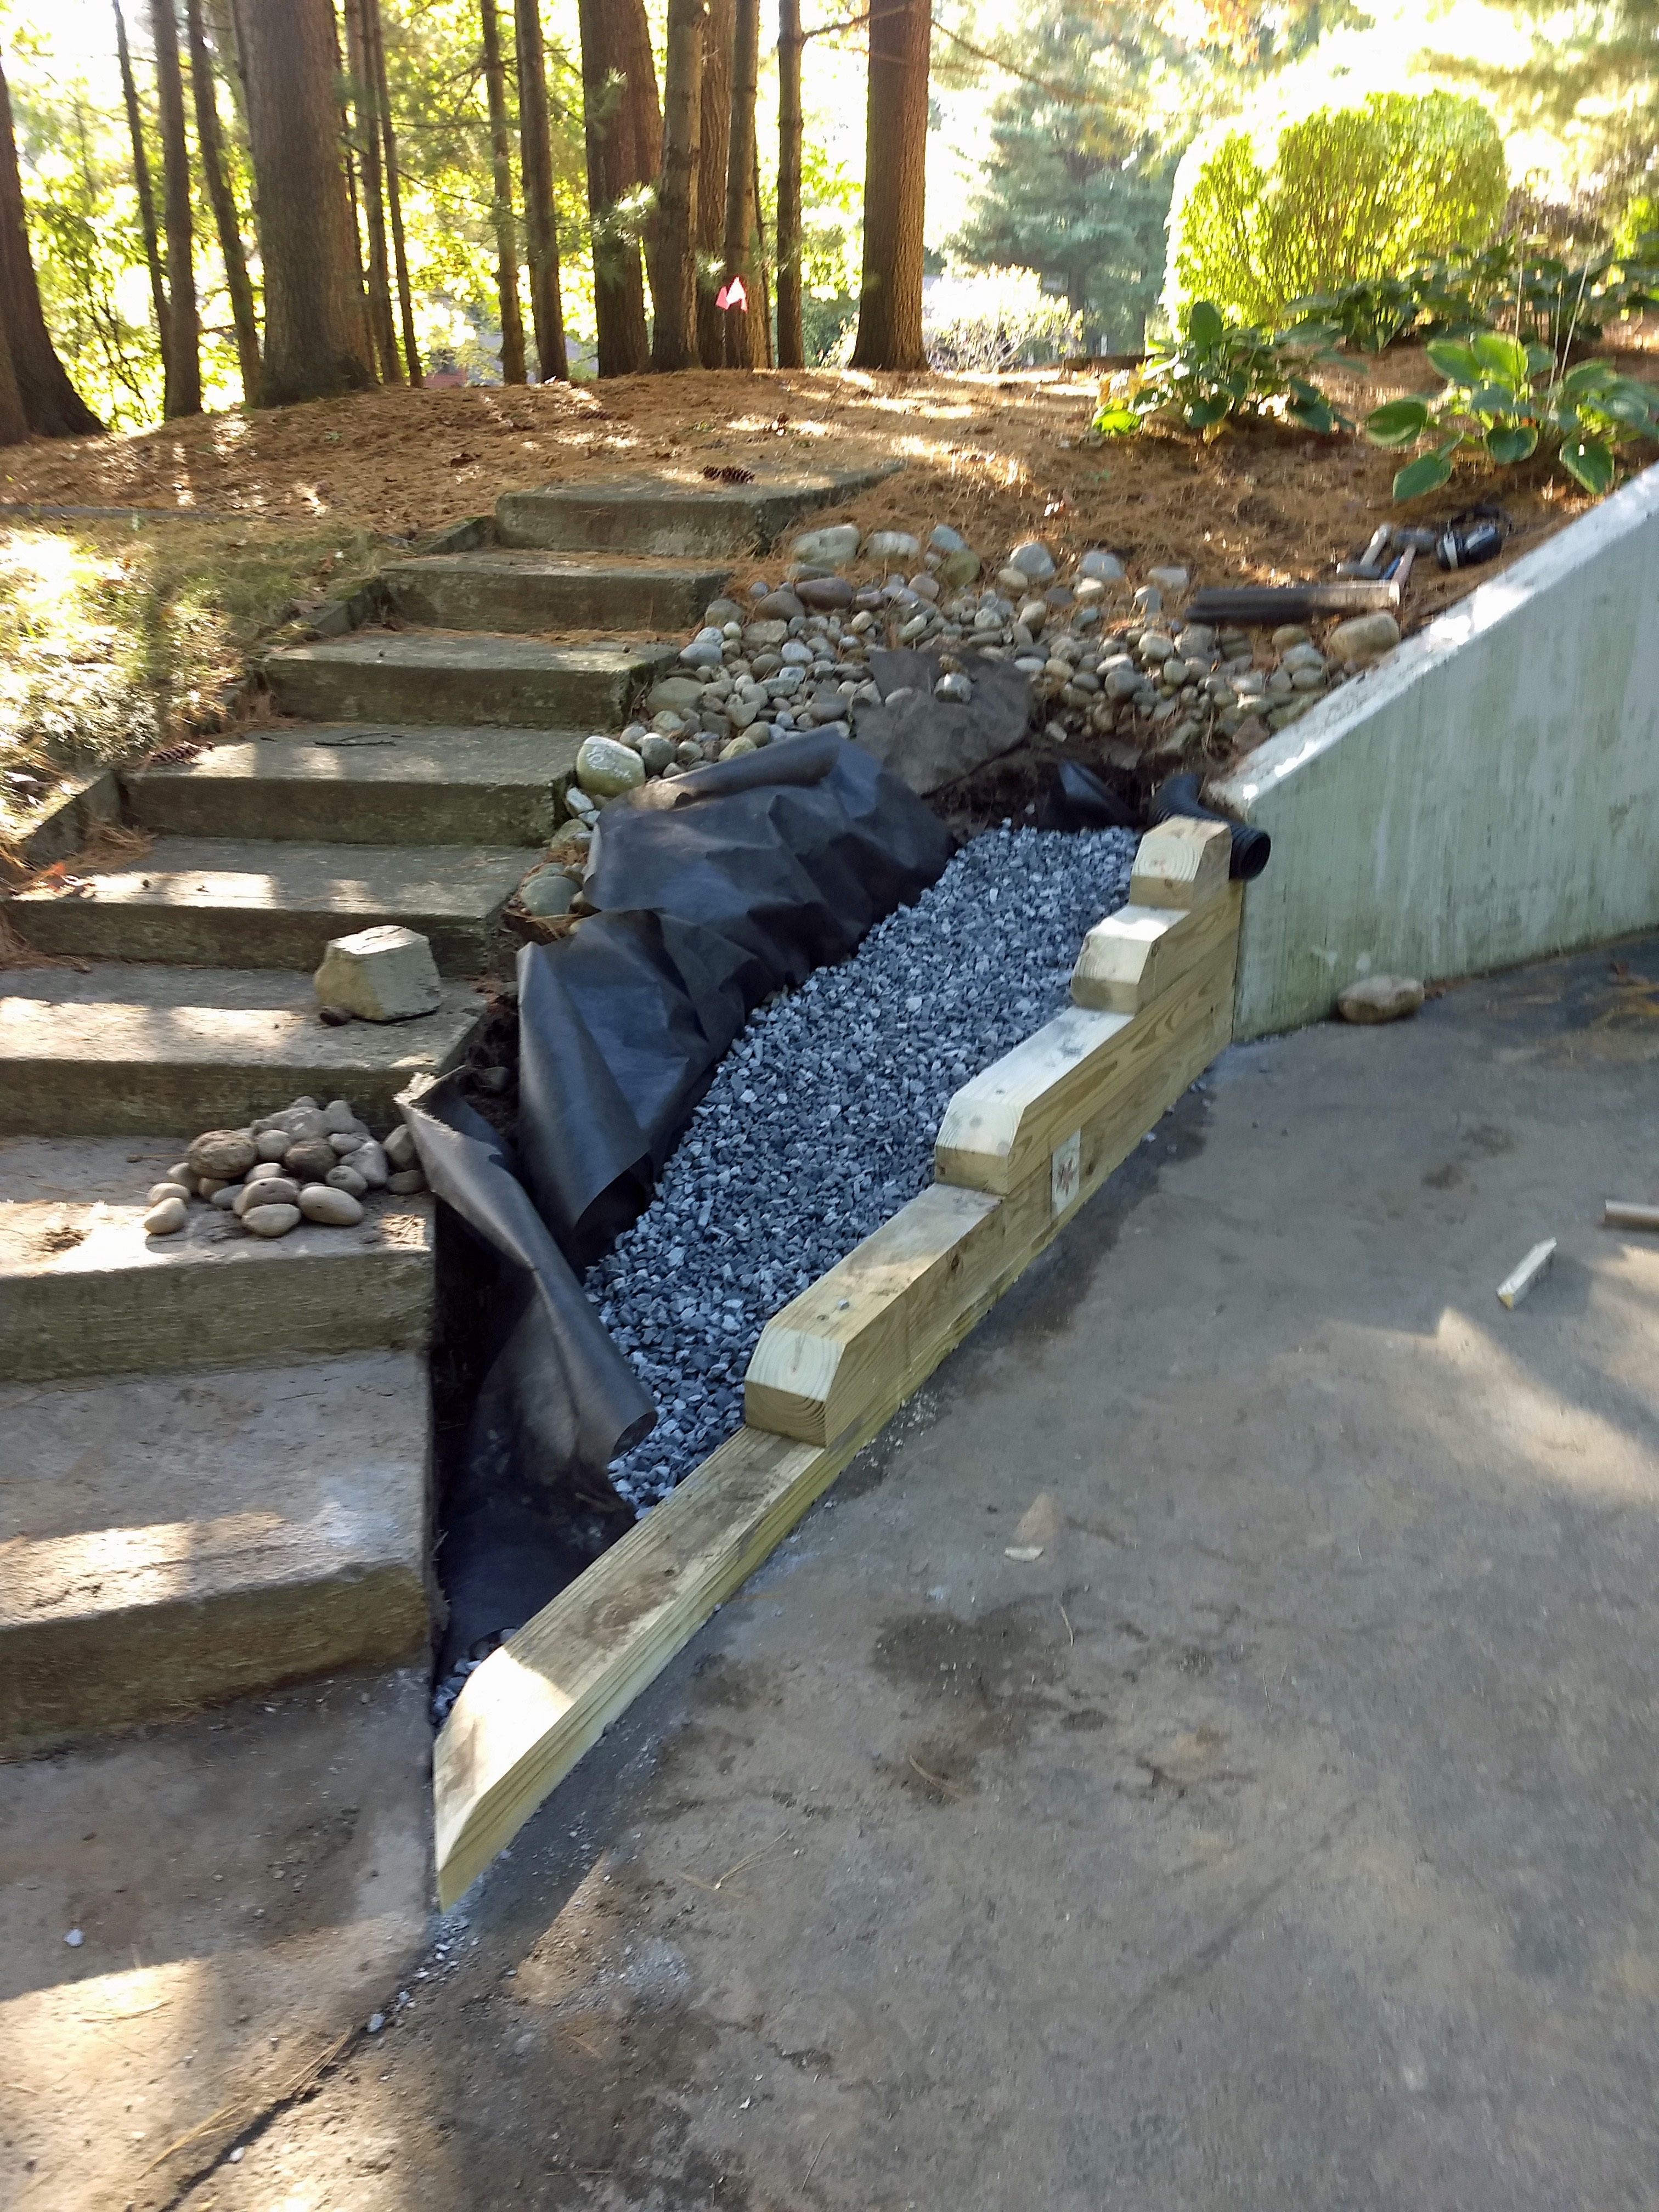 Thumbnail of the new wooden retaining wall, stone, and landscaping fabric in place